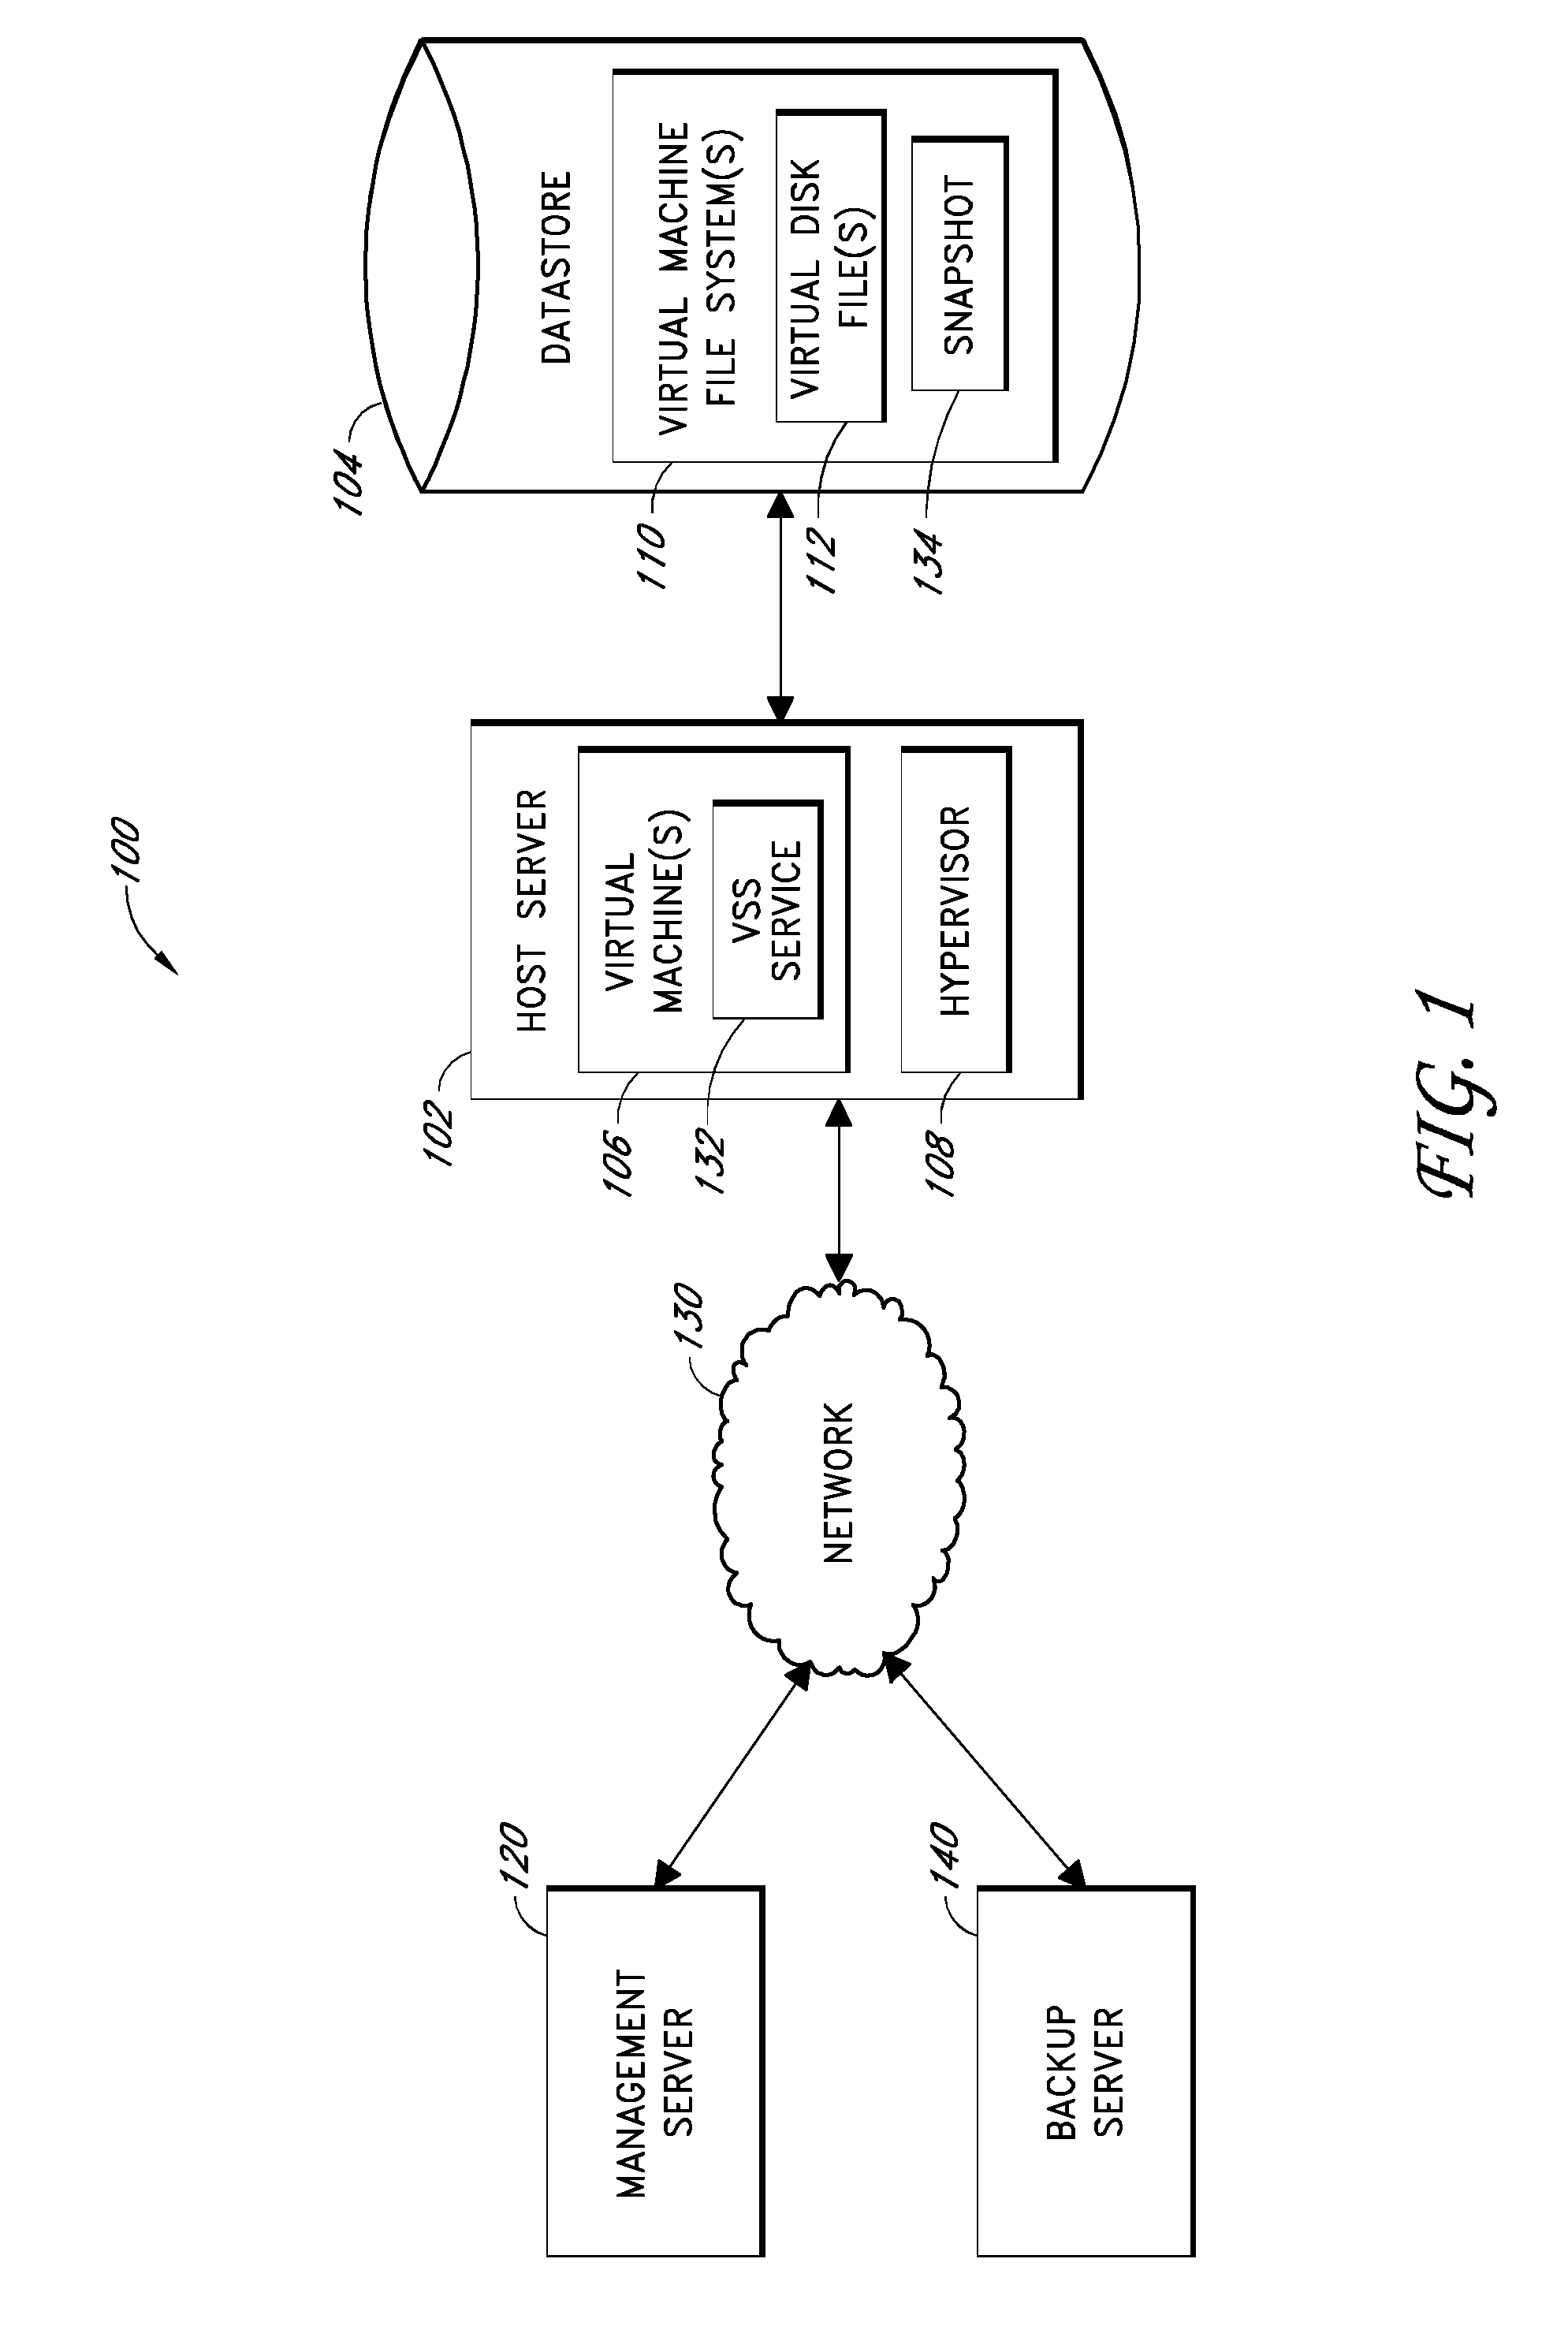 Systems and methods for performing backup operations of virtual machine files